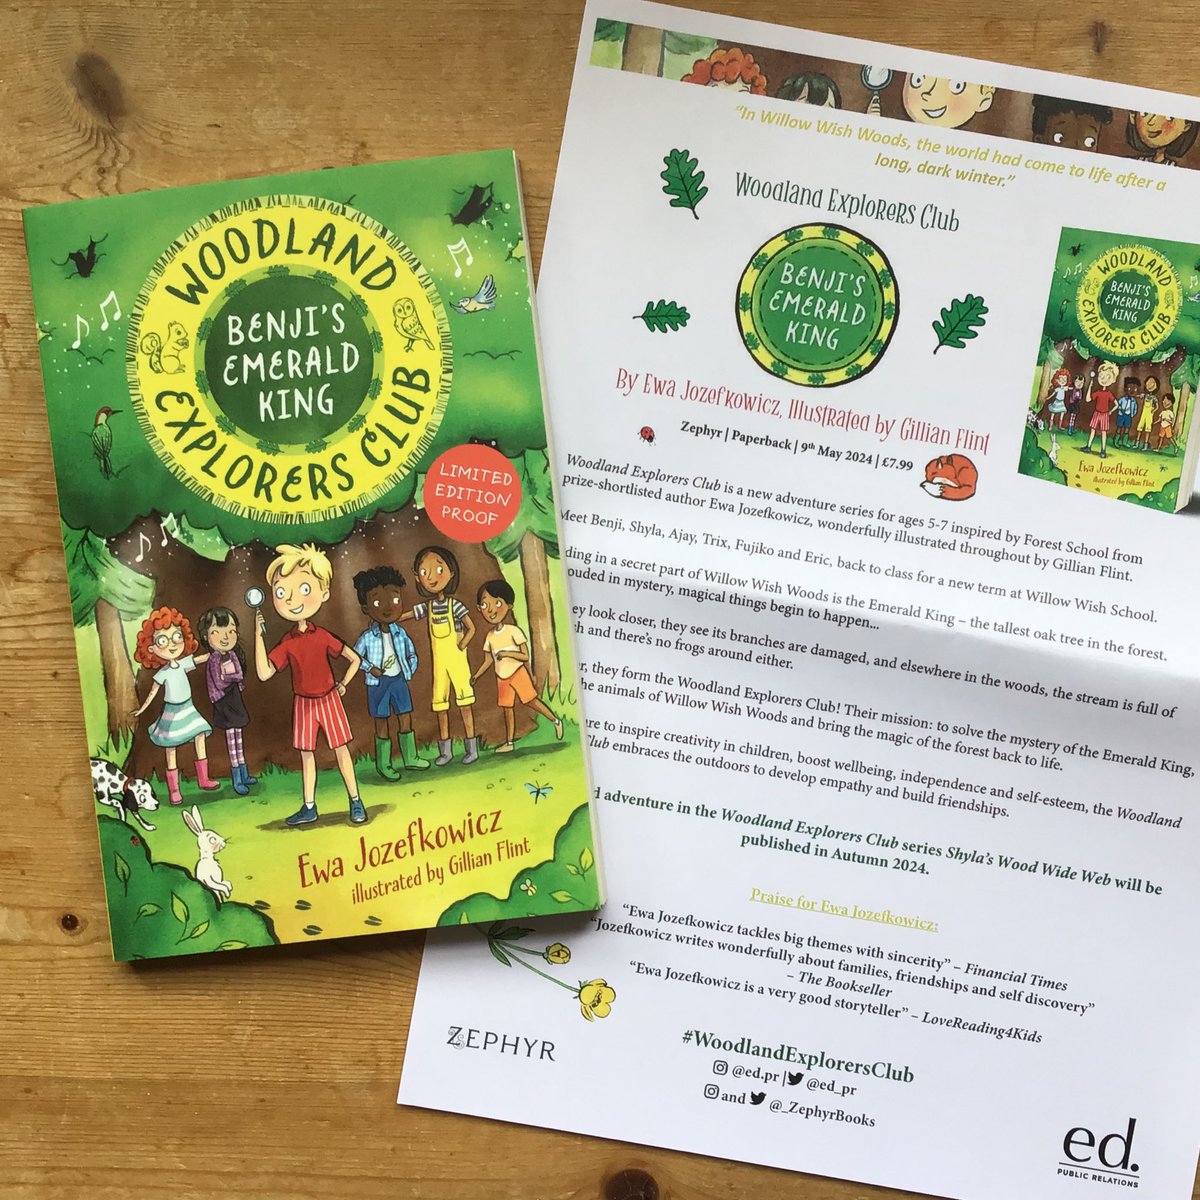 This looks like a fab springtime read! Huge thanks to @ed_pr @_ZephyrBooks for #WoodlandExplorersClub: Benji's Emerald King by @EwaJozefkowicz, illustrated by Gillian Flint. Out 09/05 for 5-7 readers, and inspired by Forest School, it looks gorgeous! 🥰